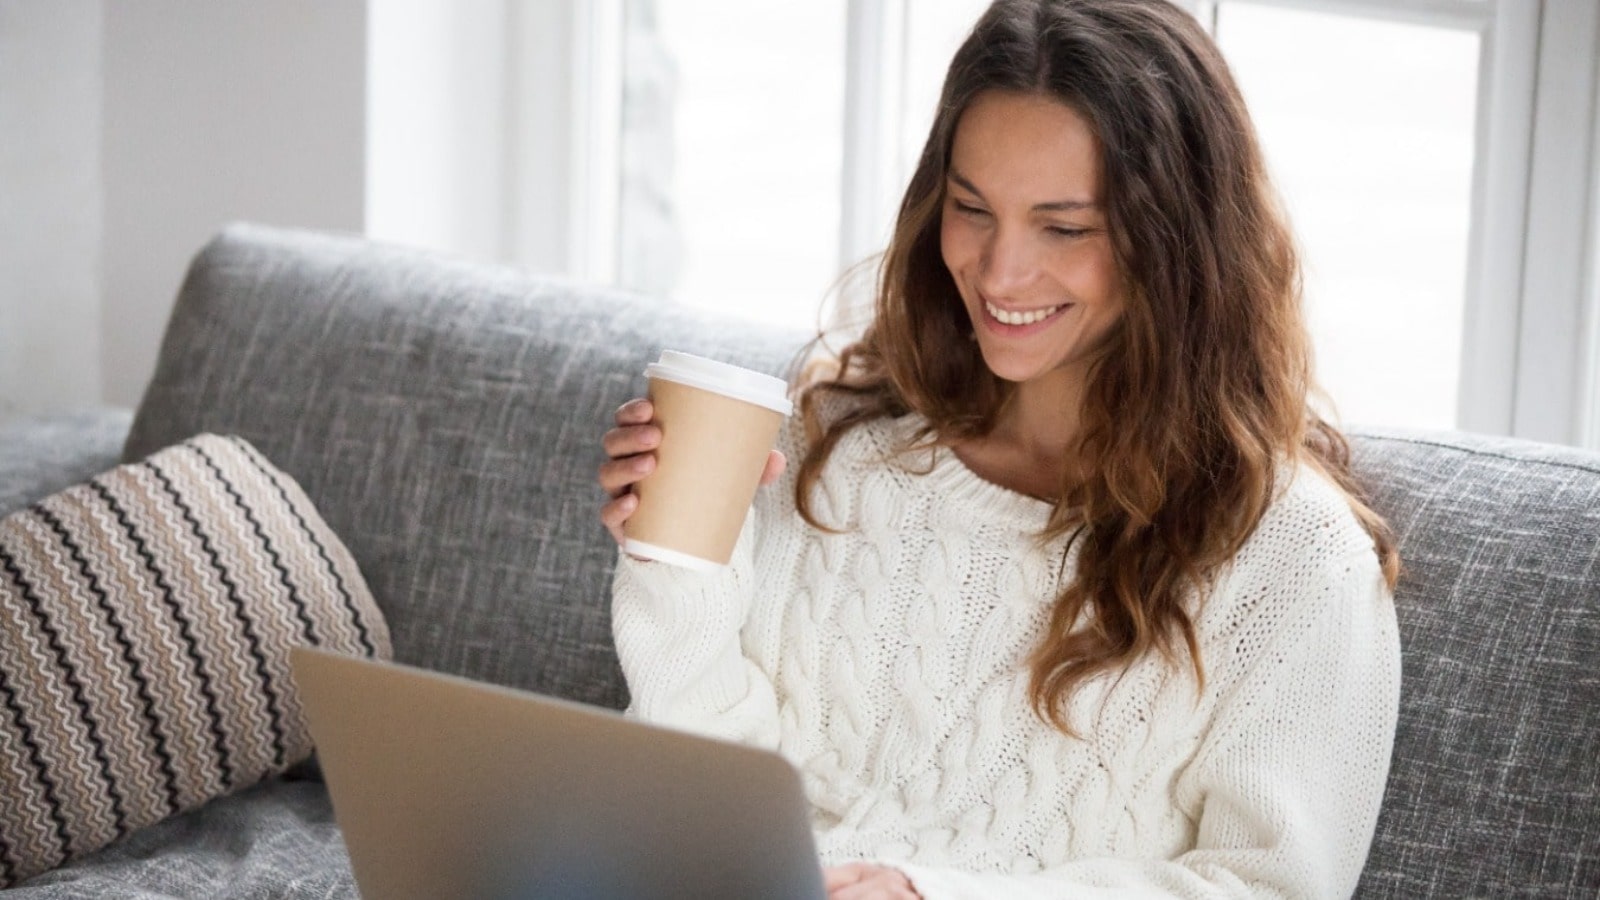 Woman sitting on couch, drinking takeaway coffee while looking at laptop.